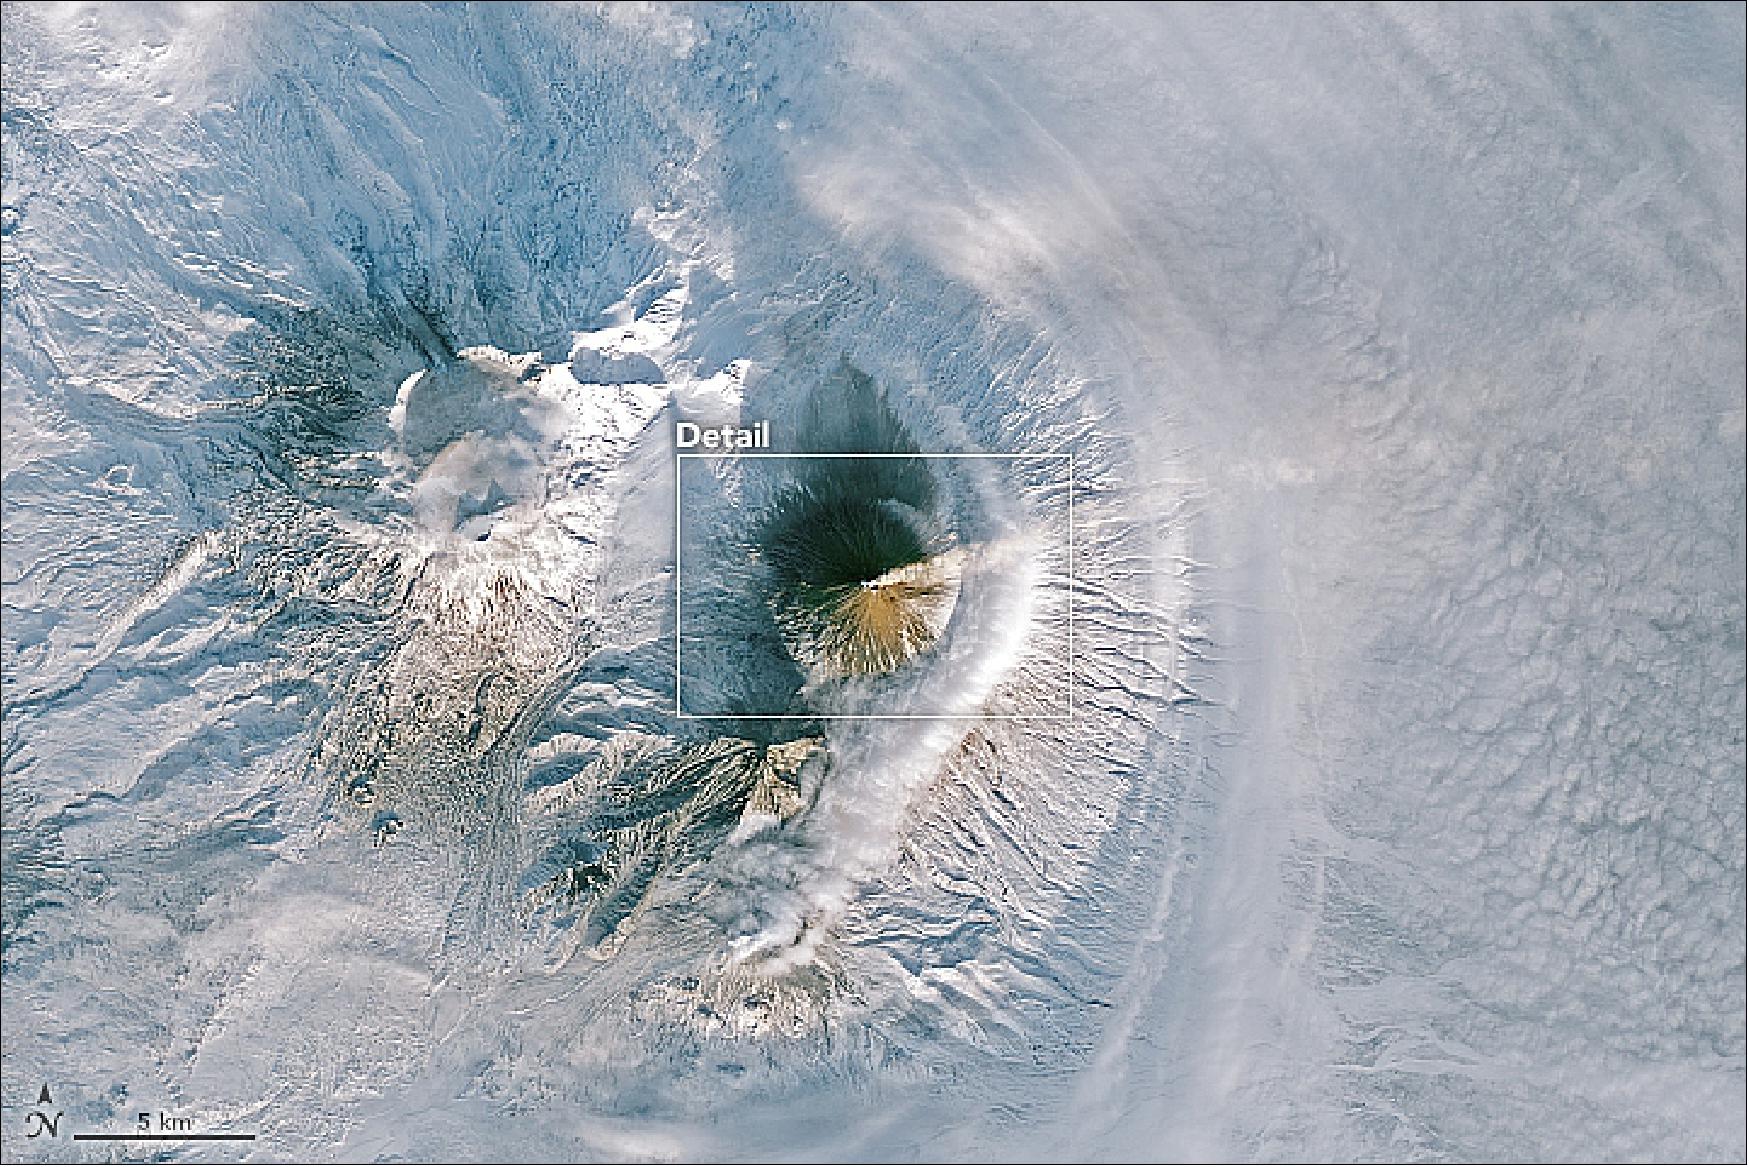 Figure 42: Overview image of OLI of the Klyuchevskaya volcano, acquired on 10 January, 2018 (image credit: NASA Earth Observatory, image by Joshua Stevens and Jeff Schmaltz, using Landsat data from the USGS, Story by Michael Carlowicz)